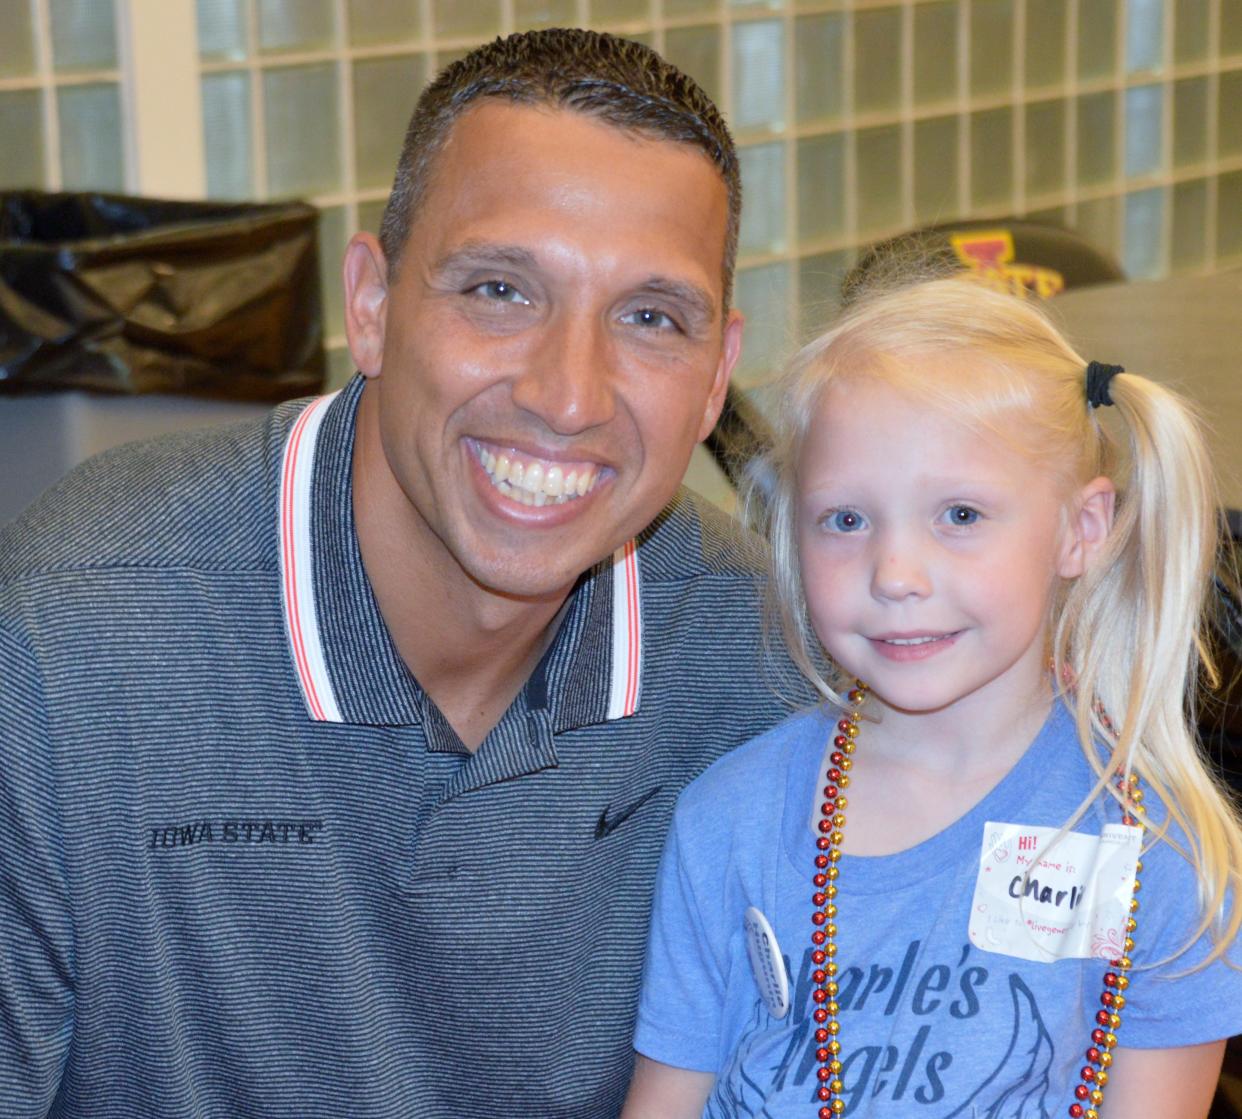 Iowa State head football coach Matt Campbell poses with Charlie Hugunin during the Charlie's Angels Lunch with Coach Matt Campbell fundraiser in 2019. The event, which raises money for cystic fibrosis research, is being held this year on Tuesday, July 19.